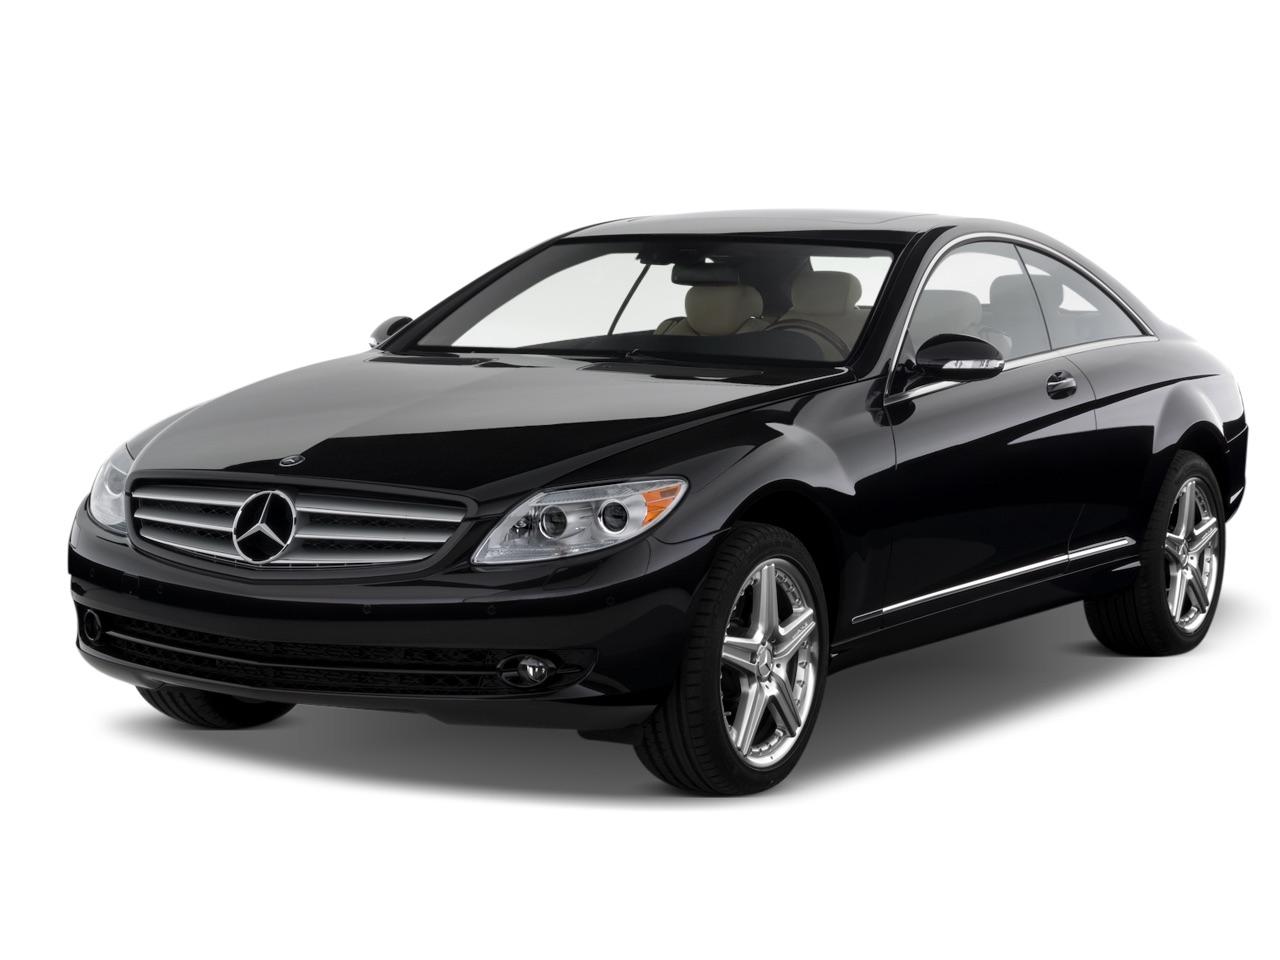  Mercedes-Benz Cl600 oem parts and accessories on sale